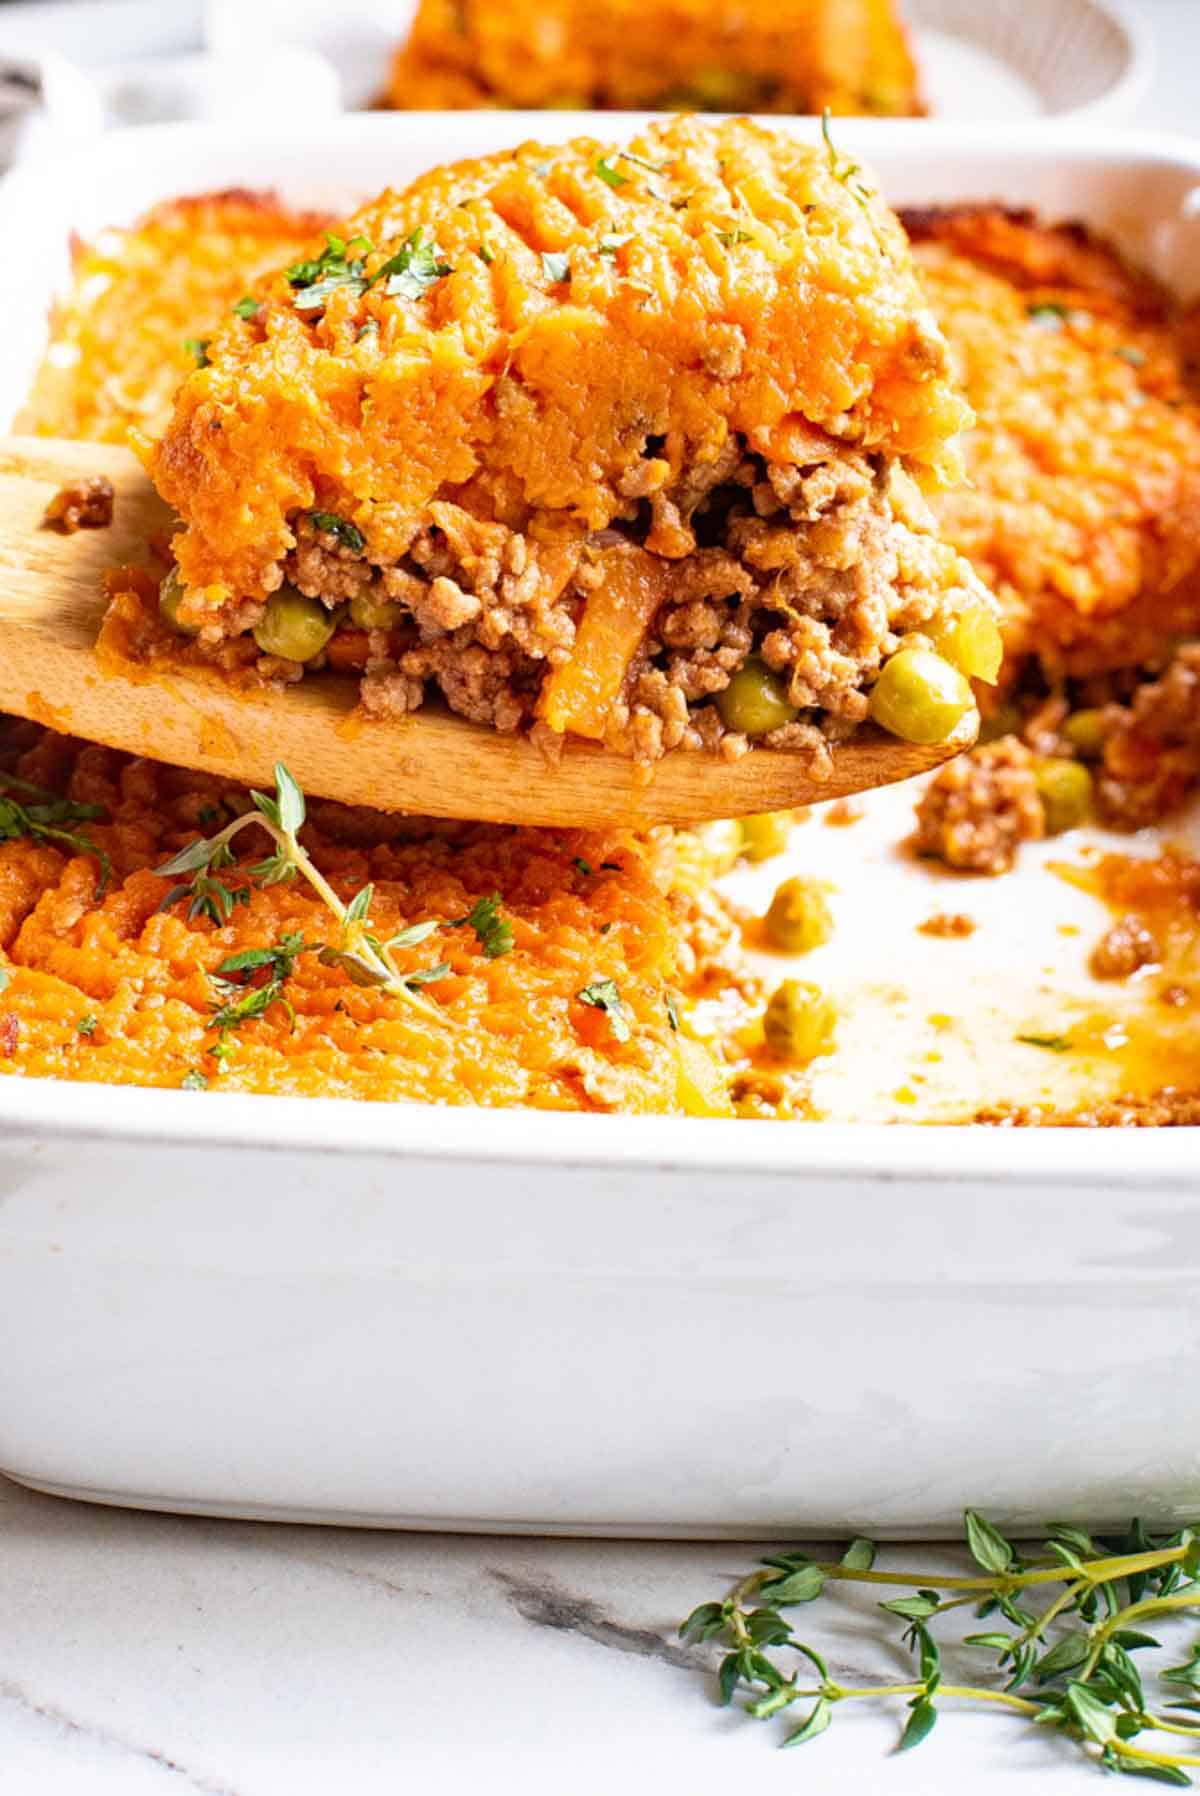 A serving of sweet potato shepherd's pie is lifted out of a casserole dish with a wooden spoon.